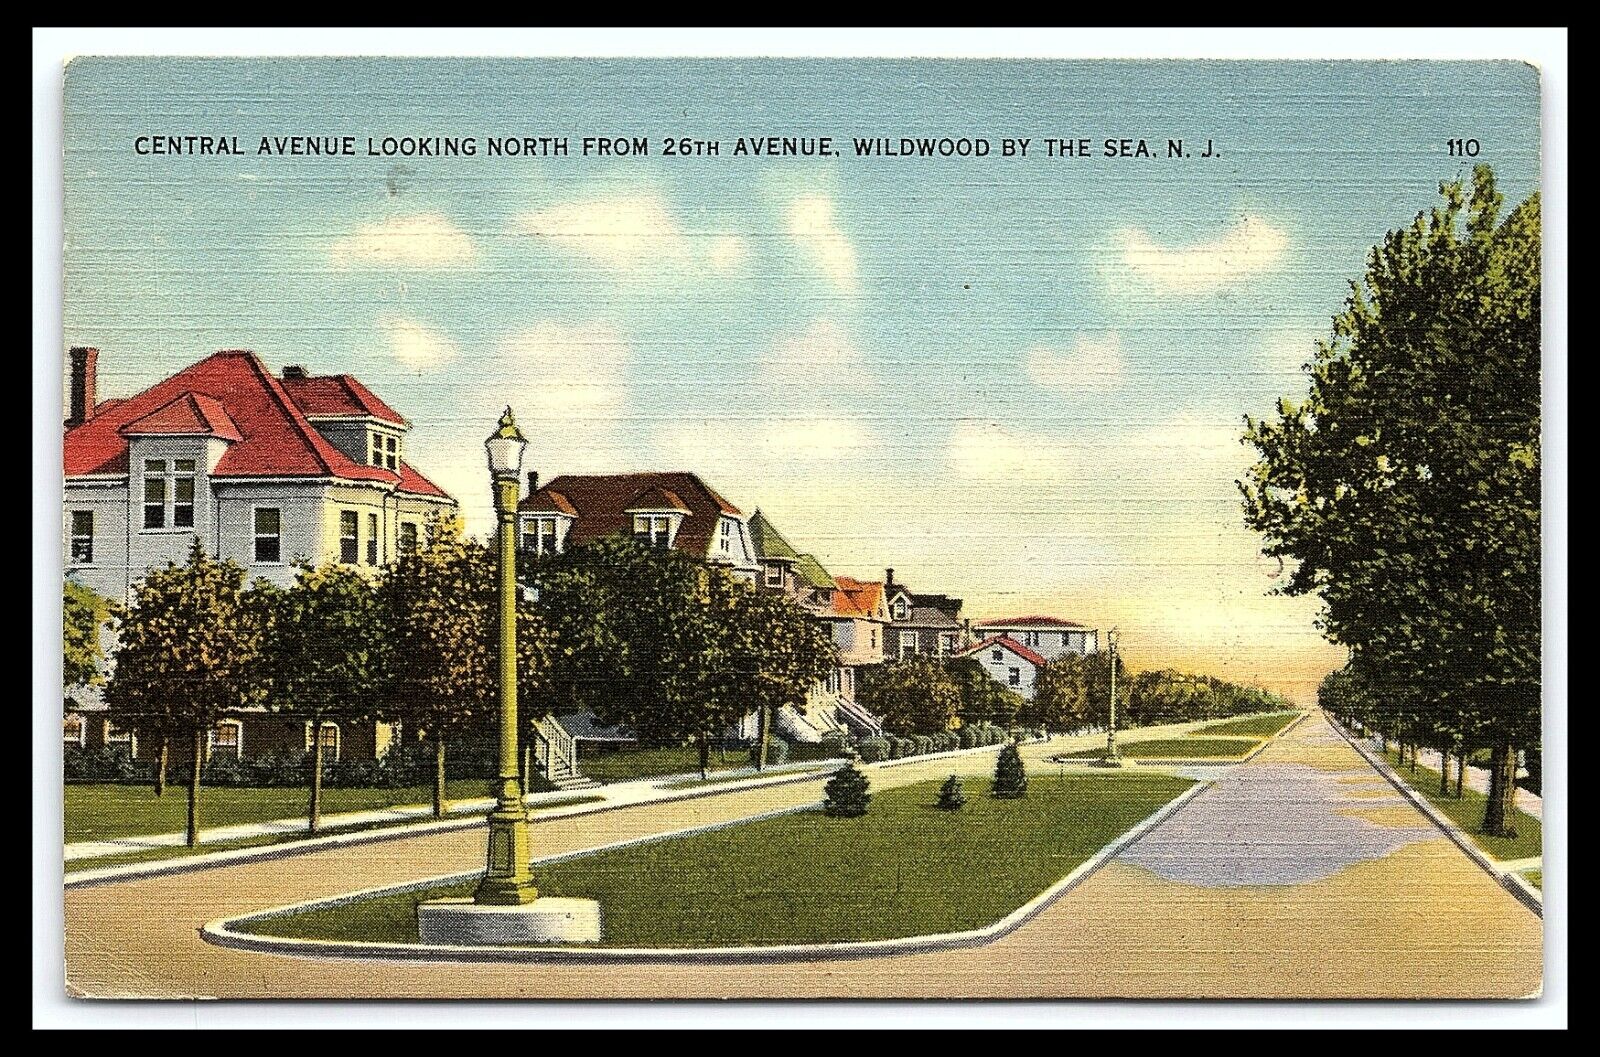 Wildwood By The Sea Looking North 26th Av Street View Postcard Posted 1943 pc291